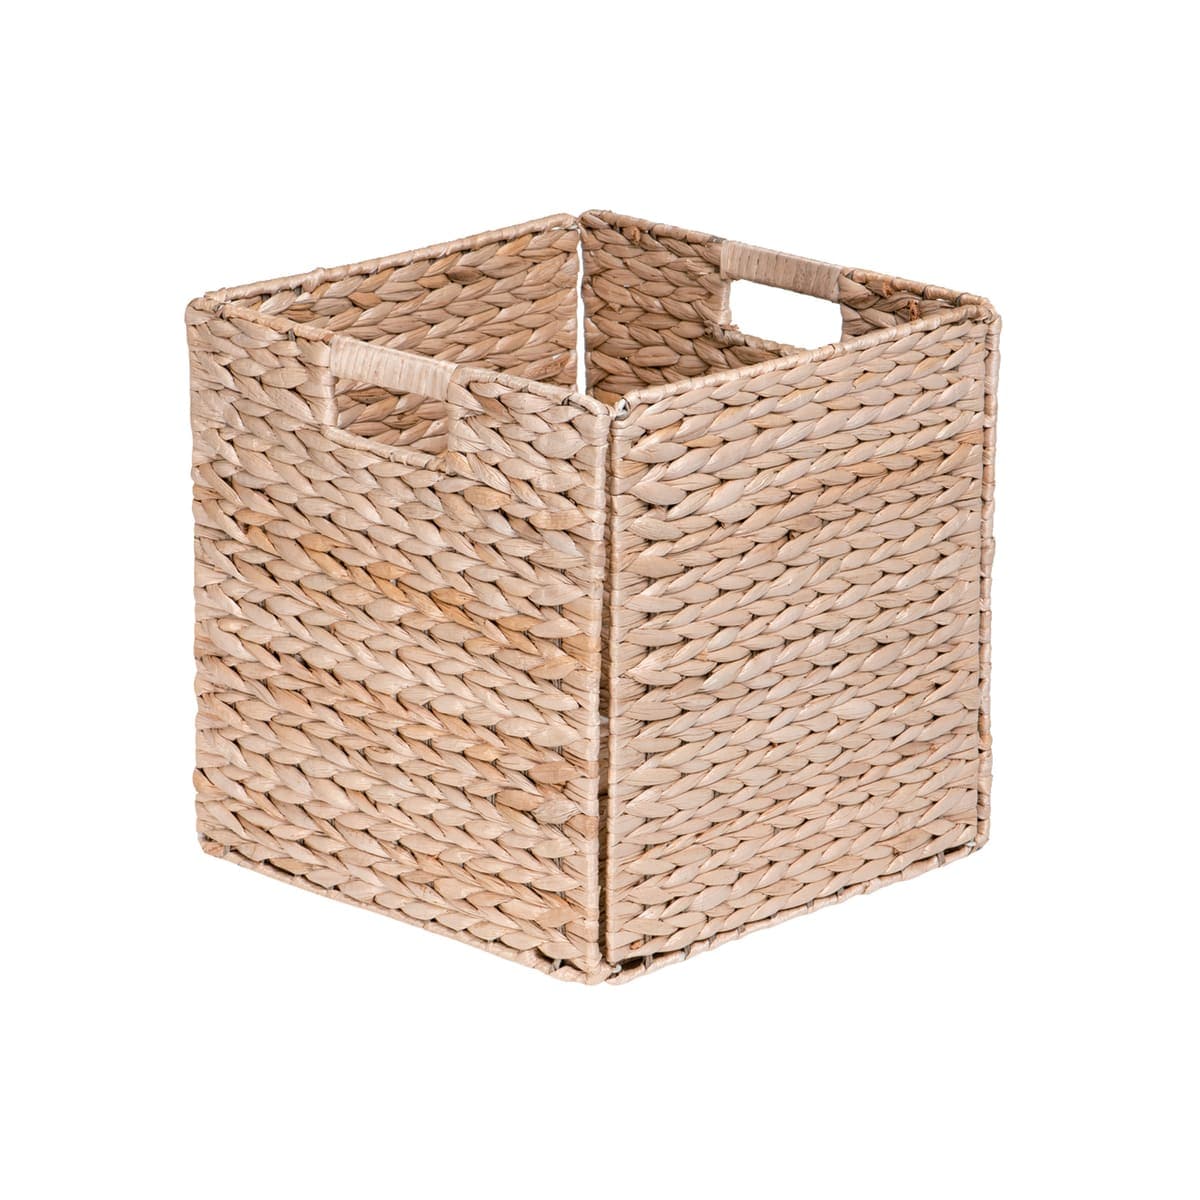 SPACEO KUB W31xD31xH31CM BASKET IN NATURAL MIDOLLINE - best price from Maltashopper.com BR410005649